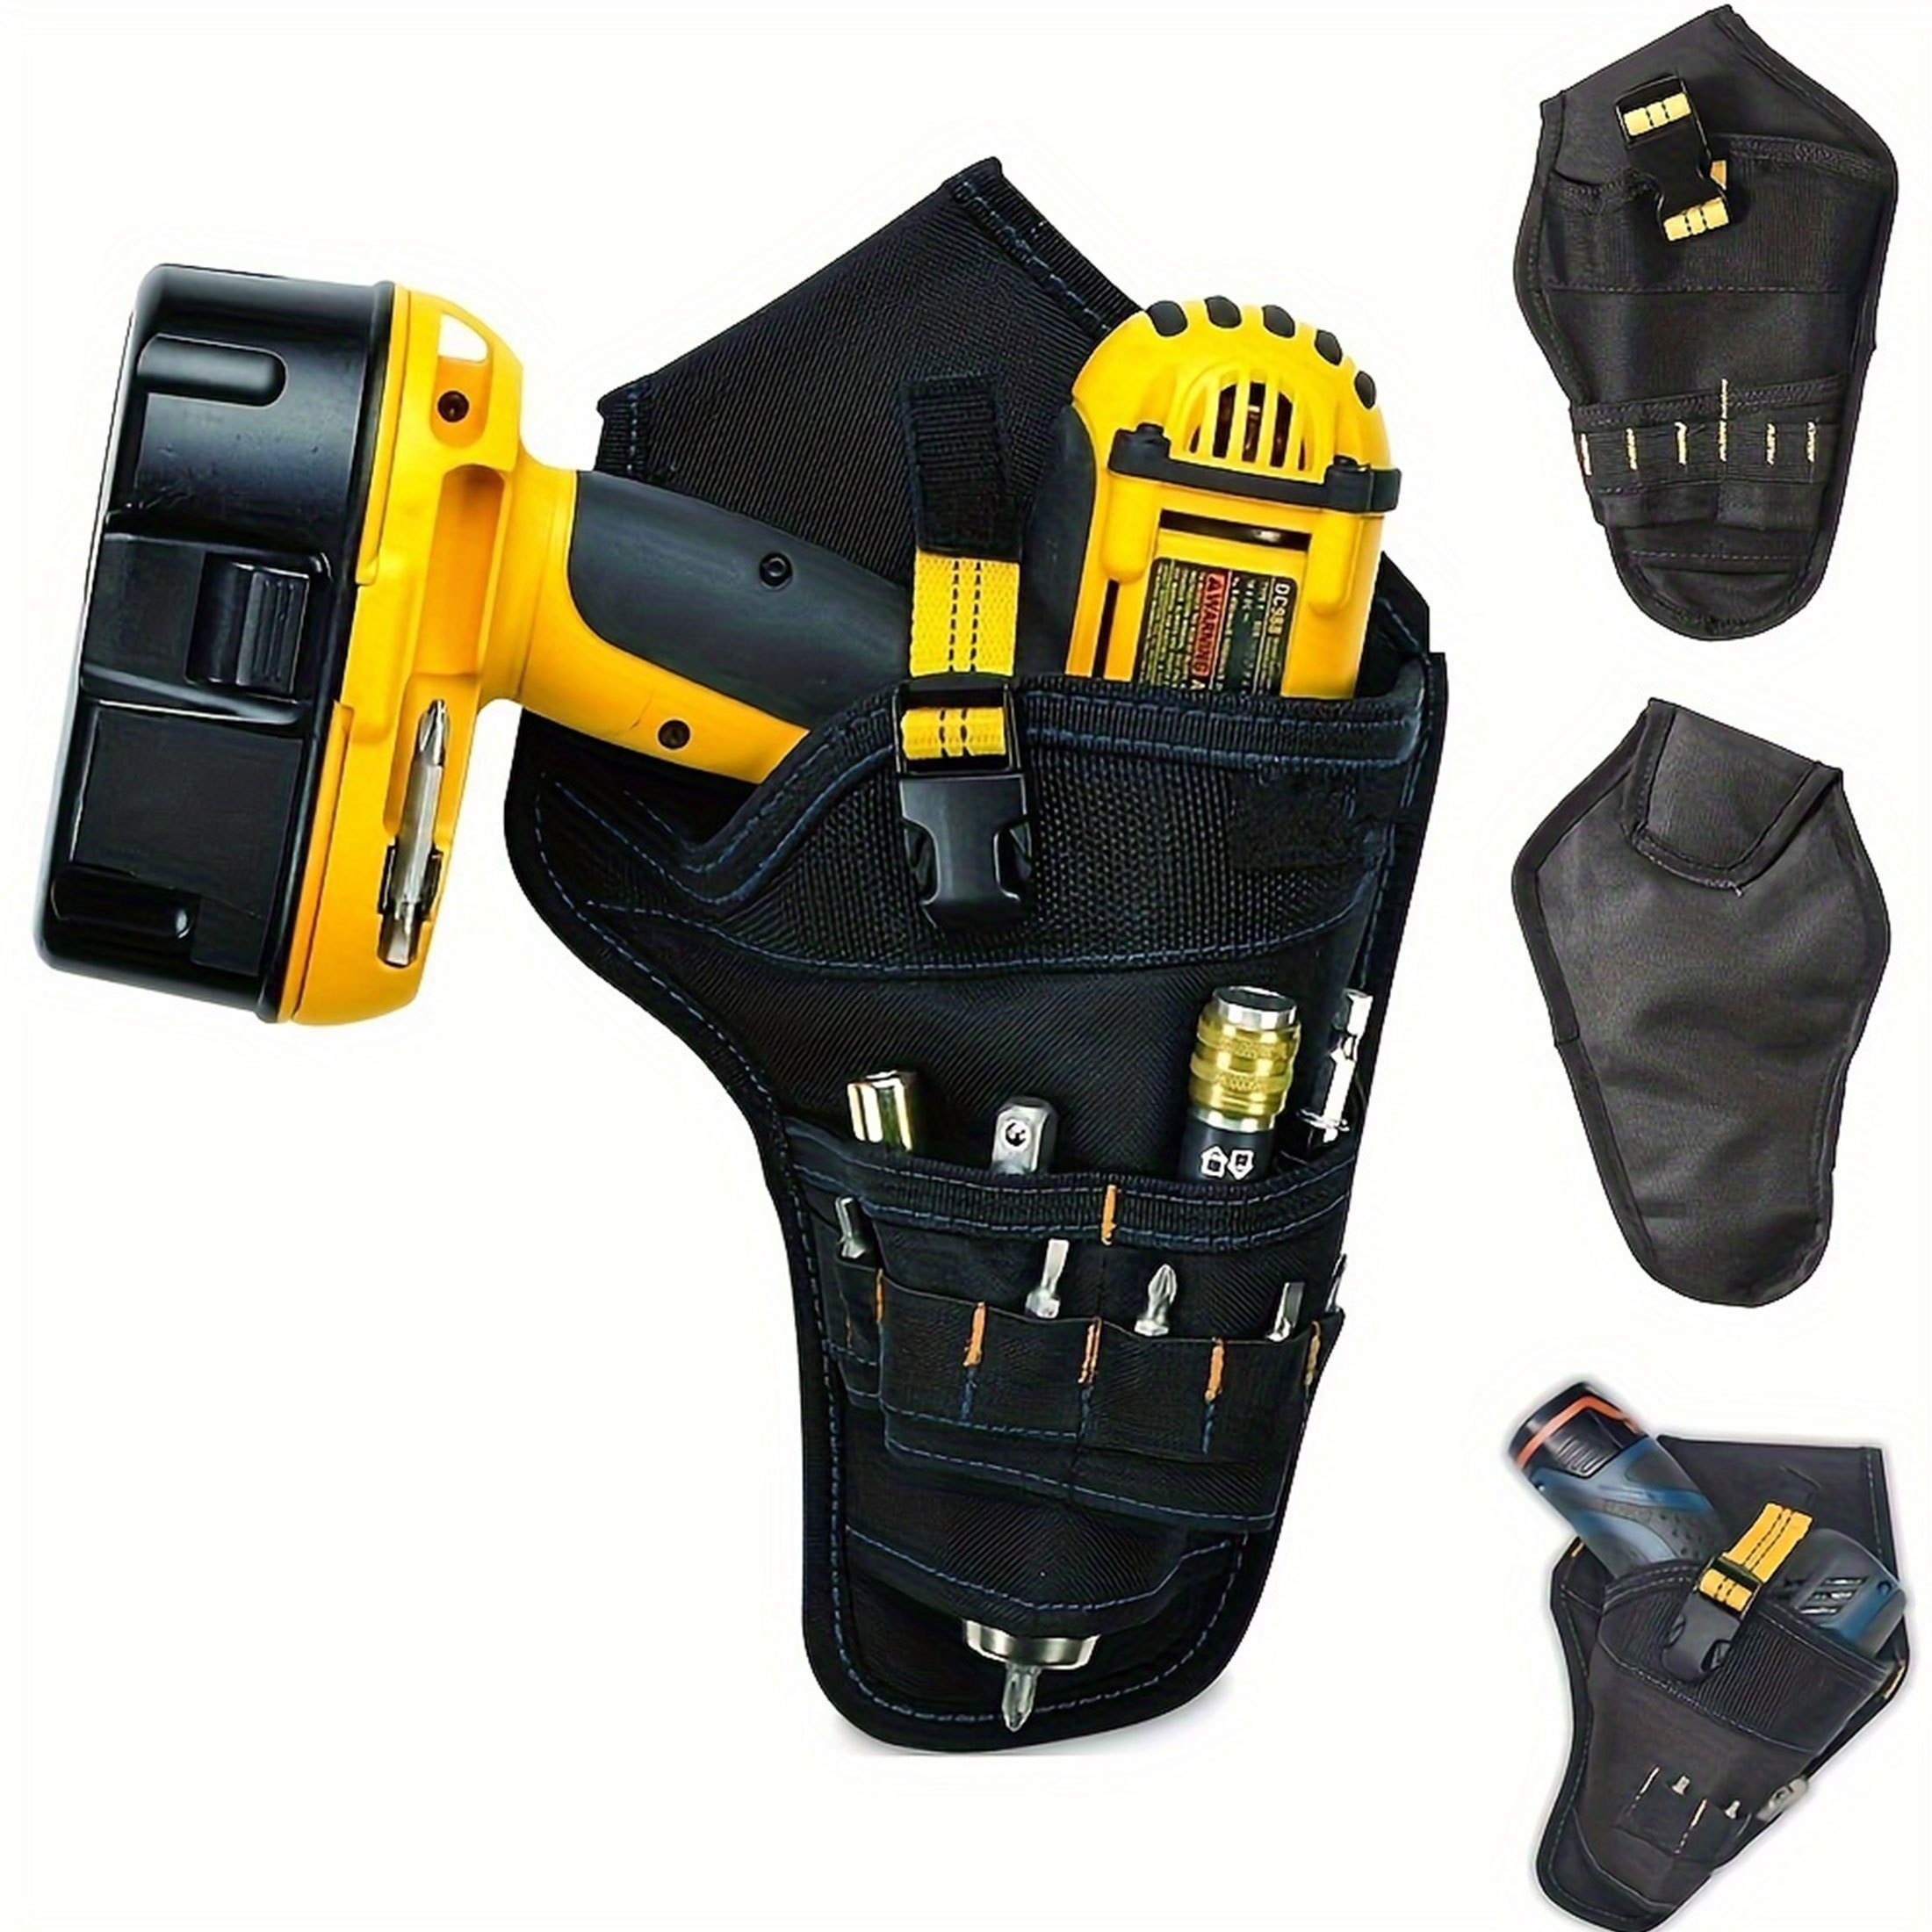 

Portable Heavy Duty Drill Driver Holster, Cordless Electrician Tool Bag, Bit Holder Belt Pouch Waist Cordless Drill Storage Pocket